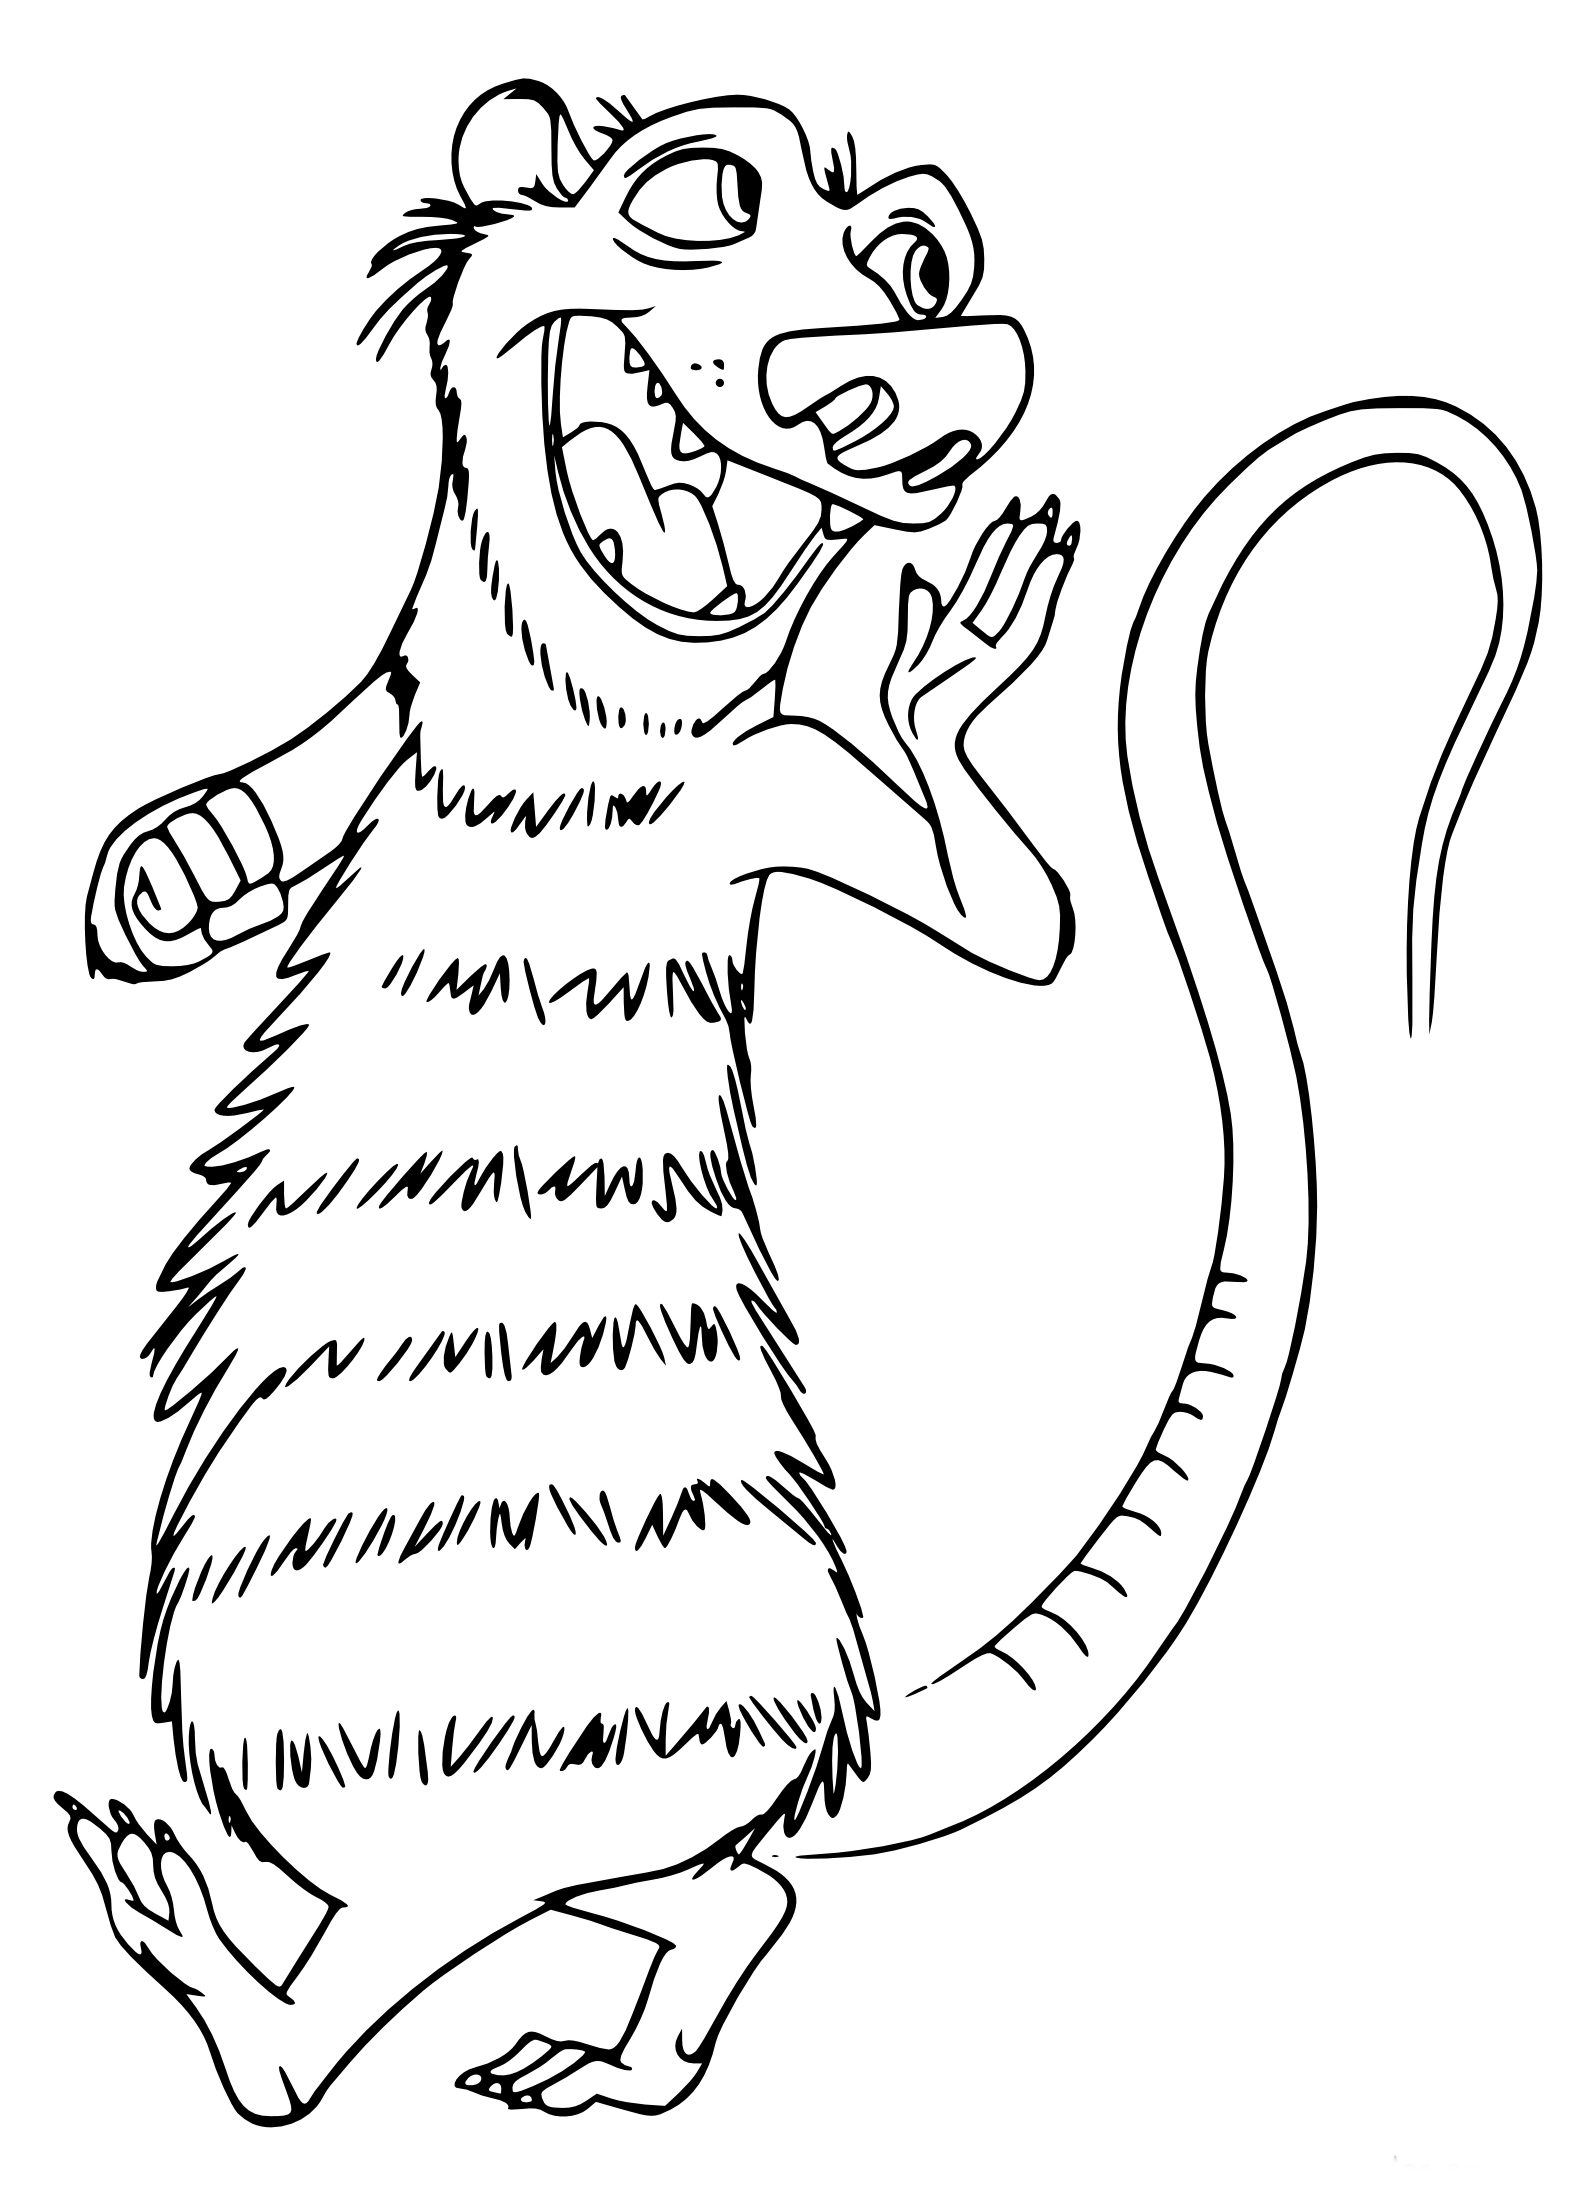 Ice Age Possum coloring page